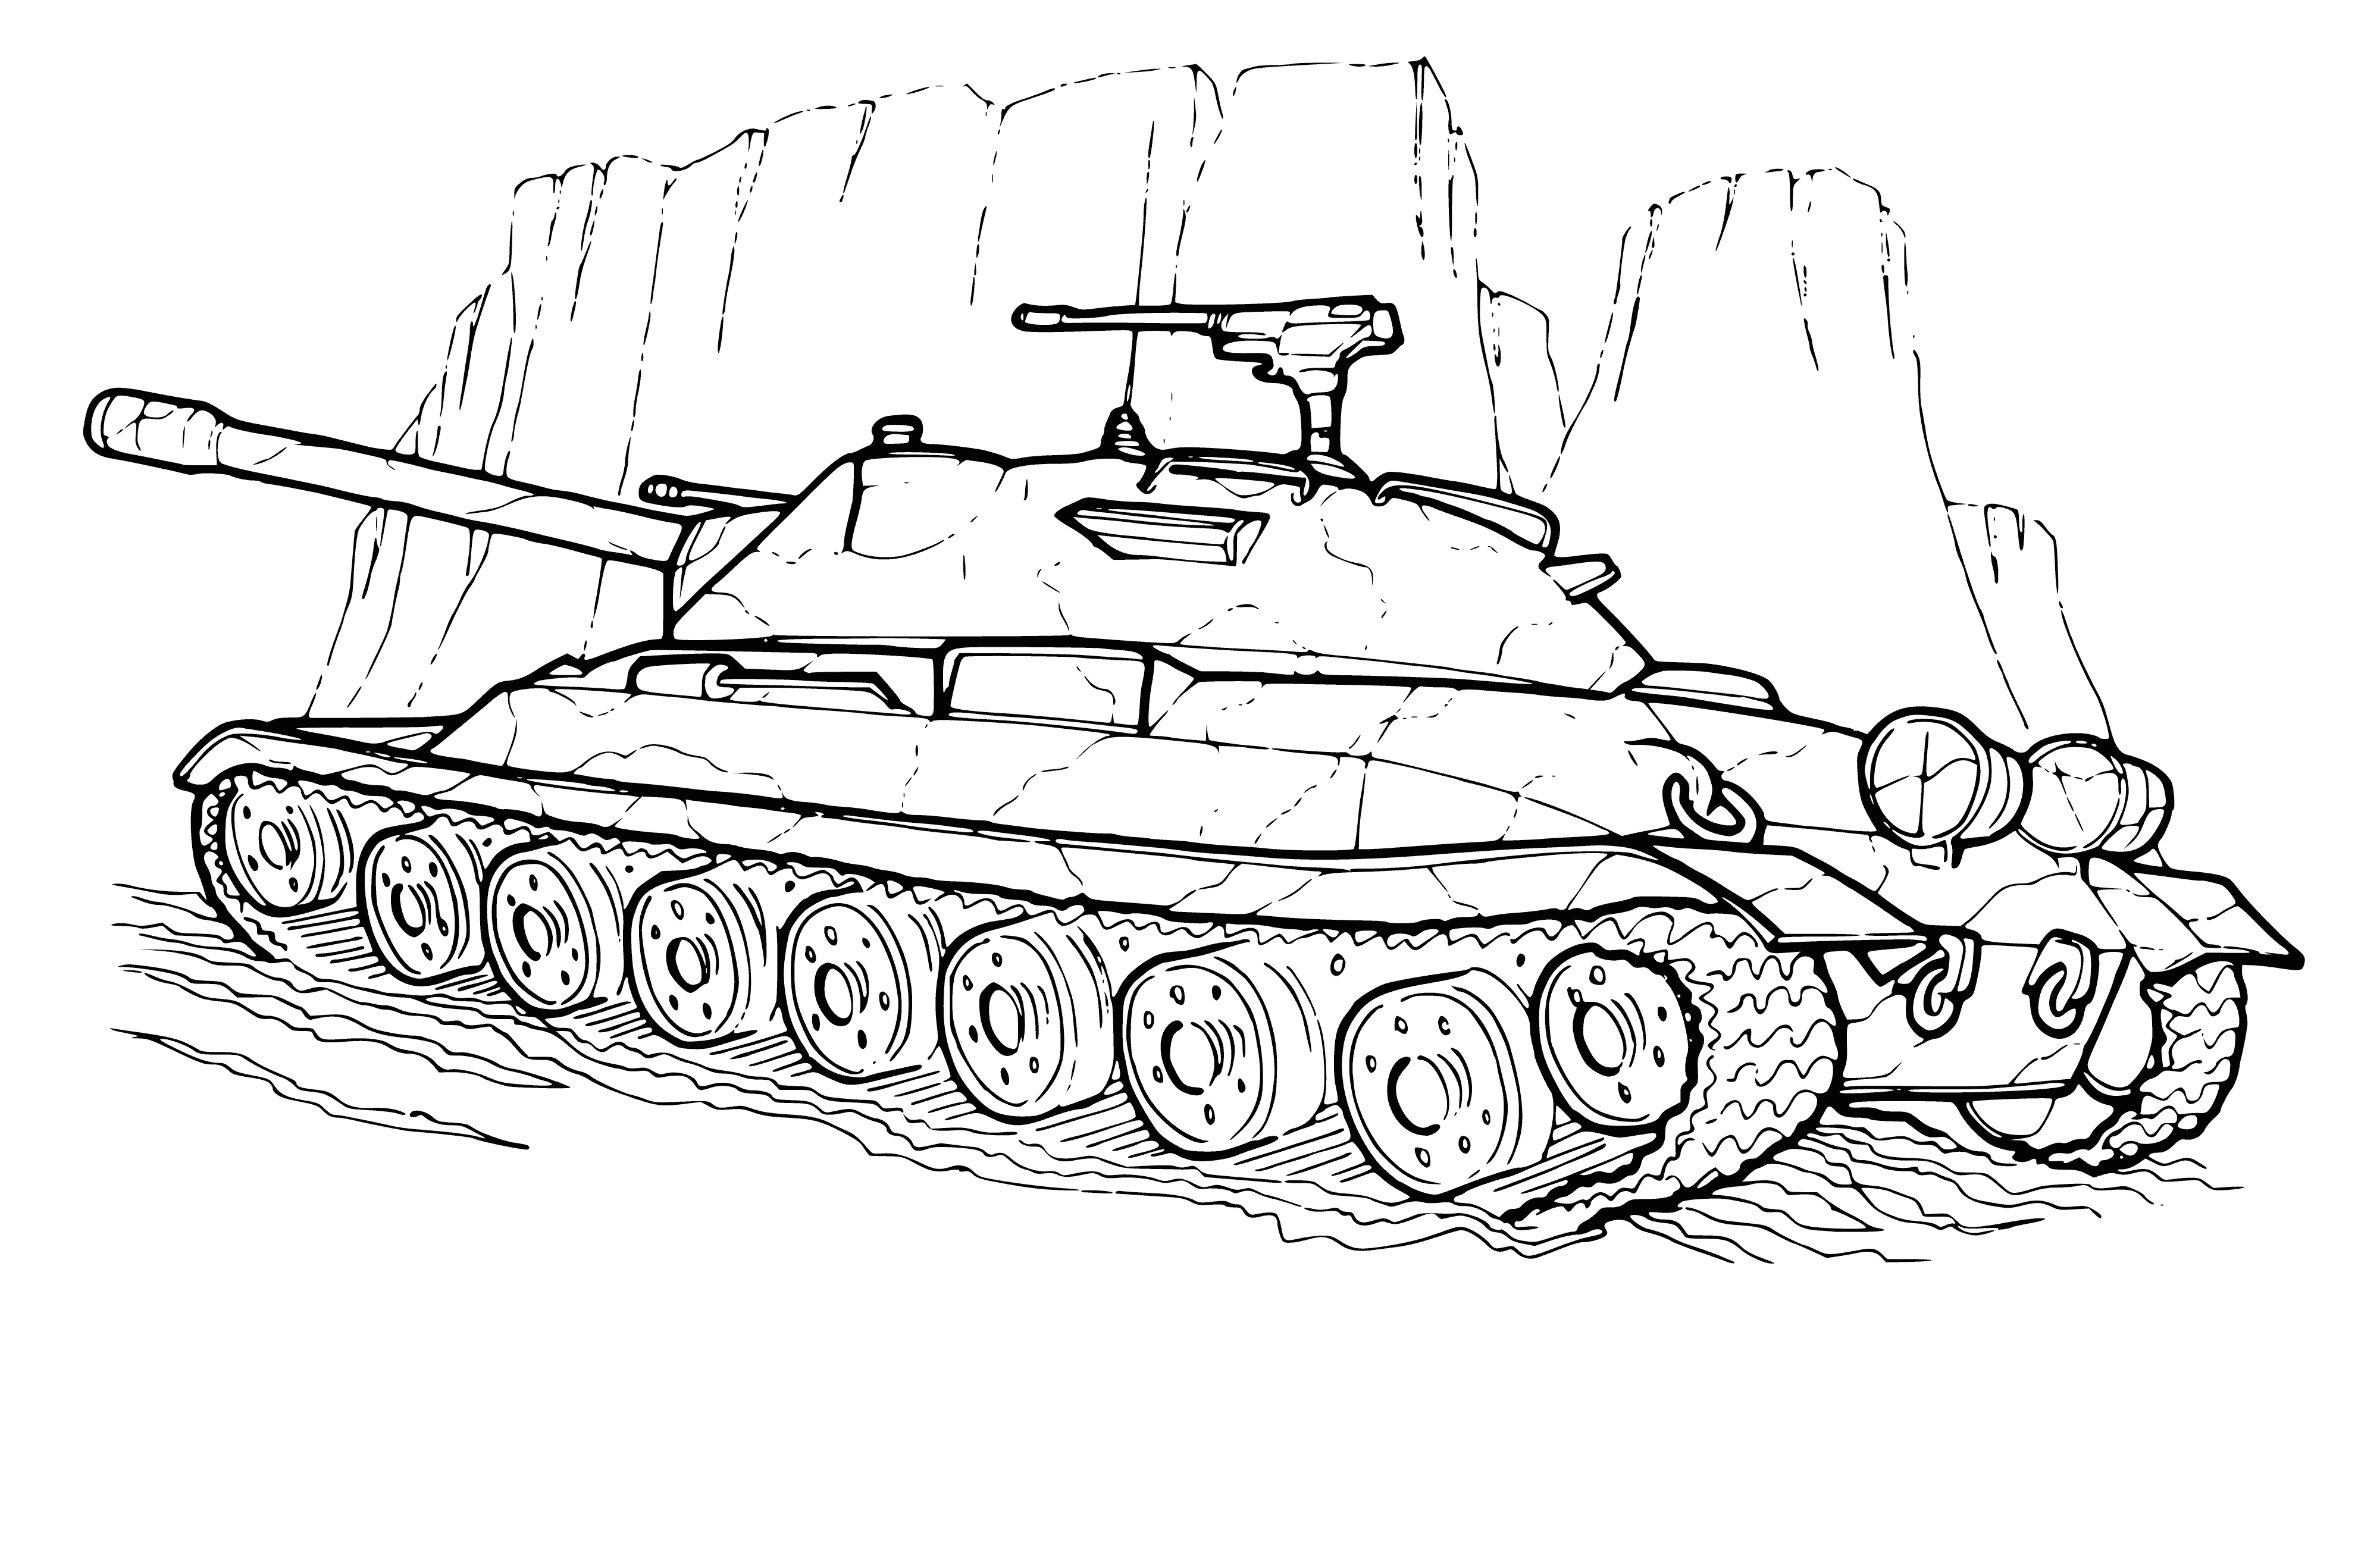 coloring page: Tank crews are highly trained experts, working together as a team to protect and defeat enemies on the battlefield.